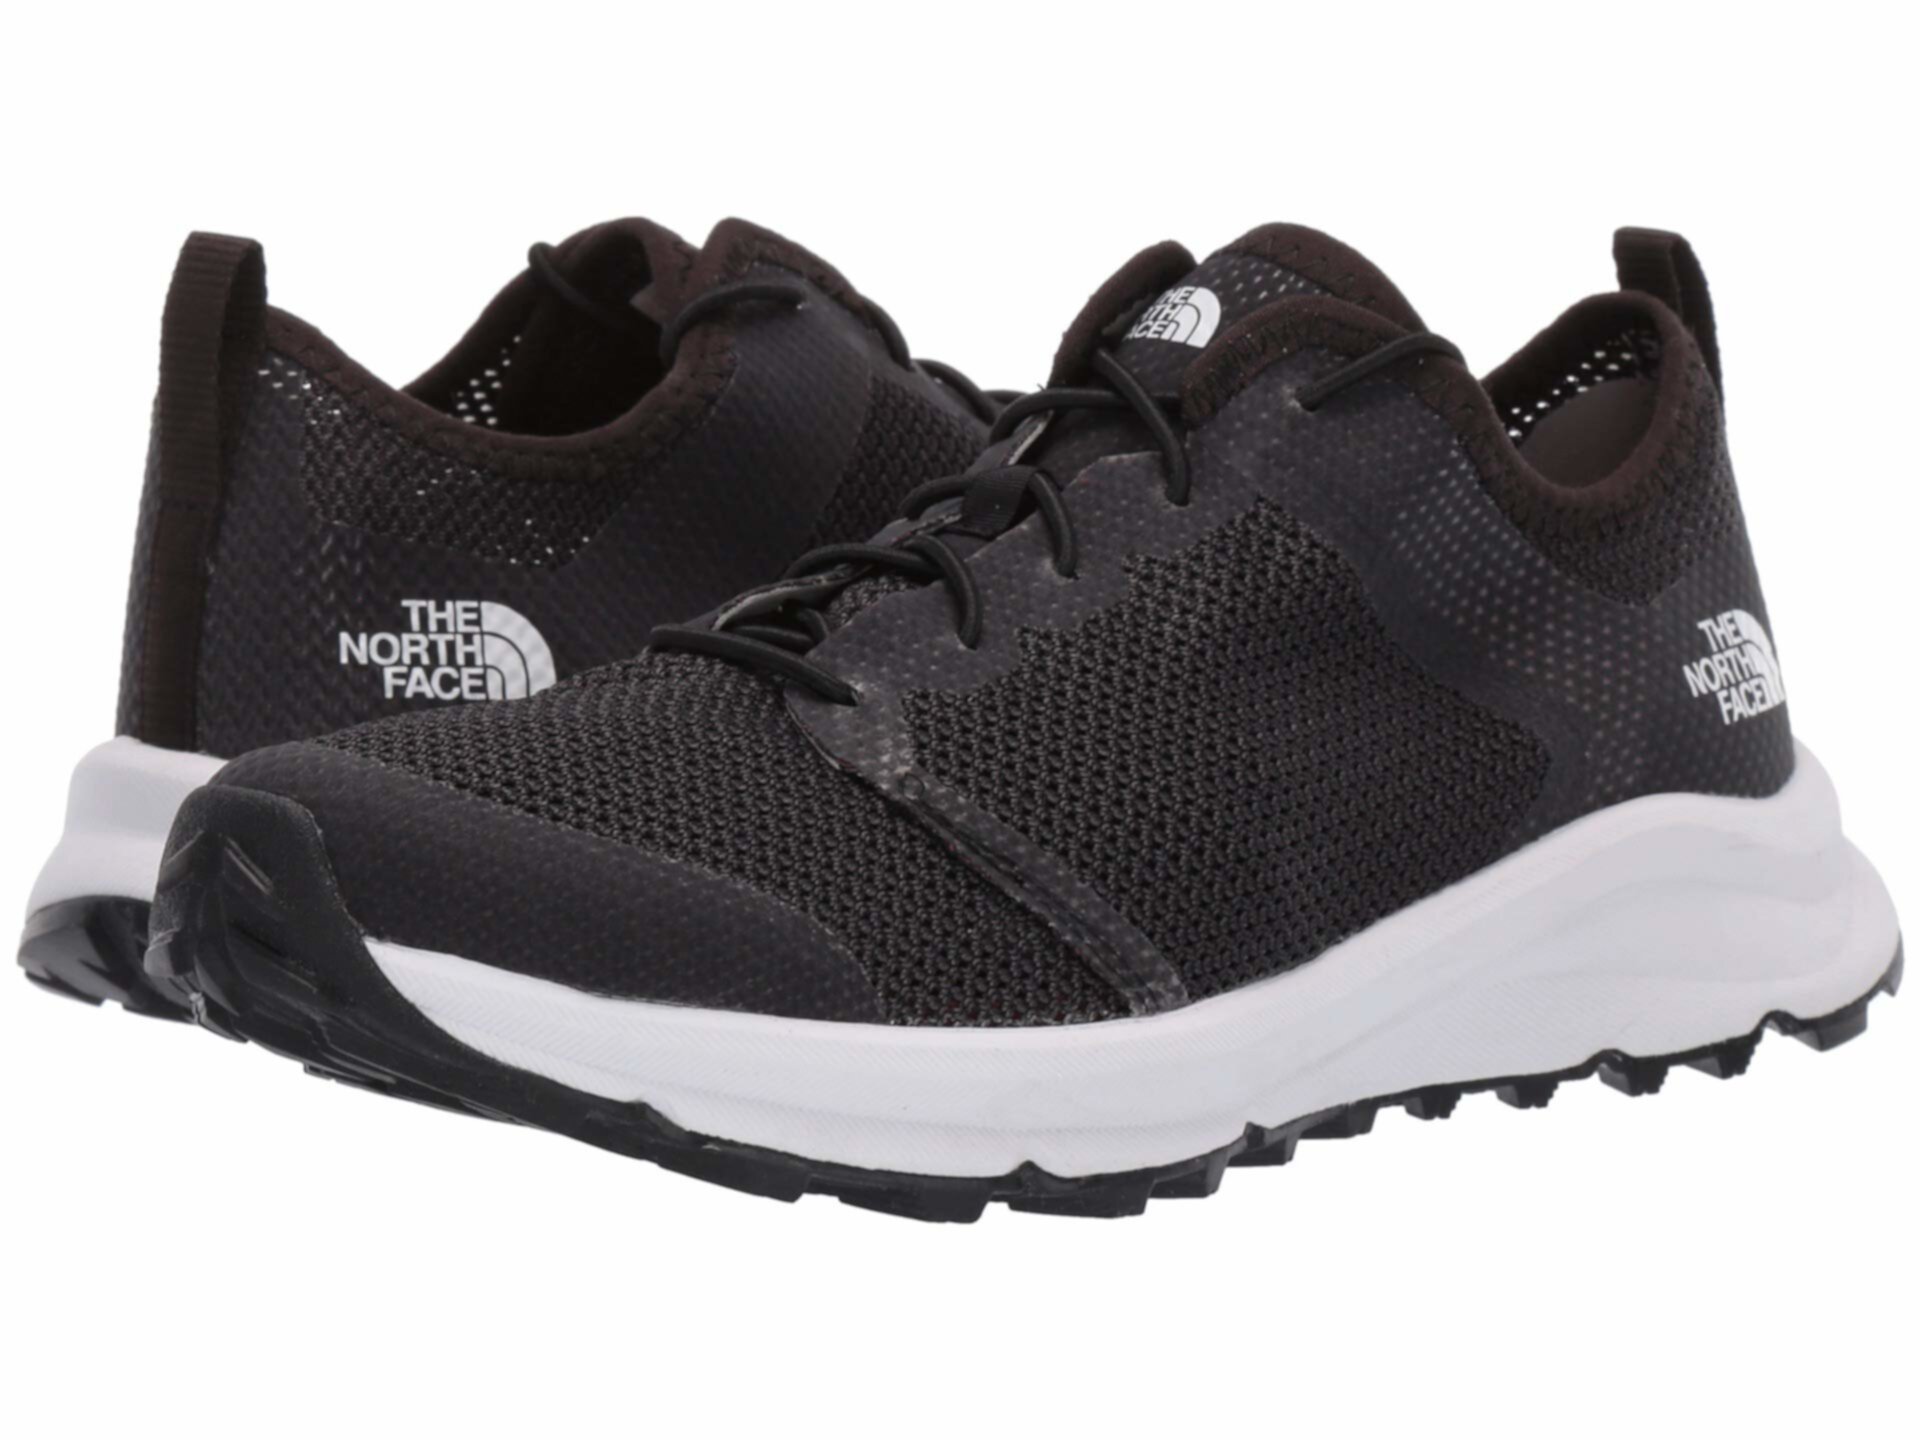 Litewave Flow Lace II The North Face